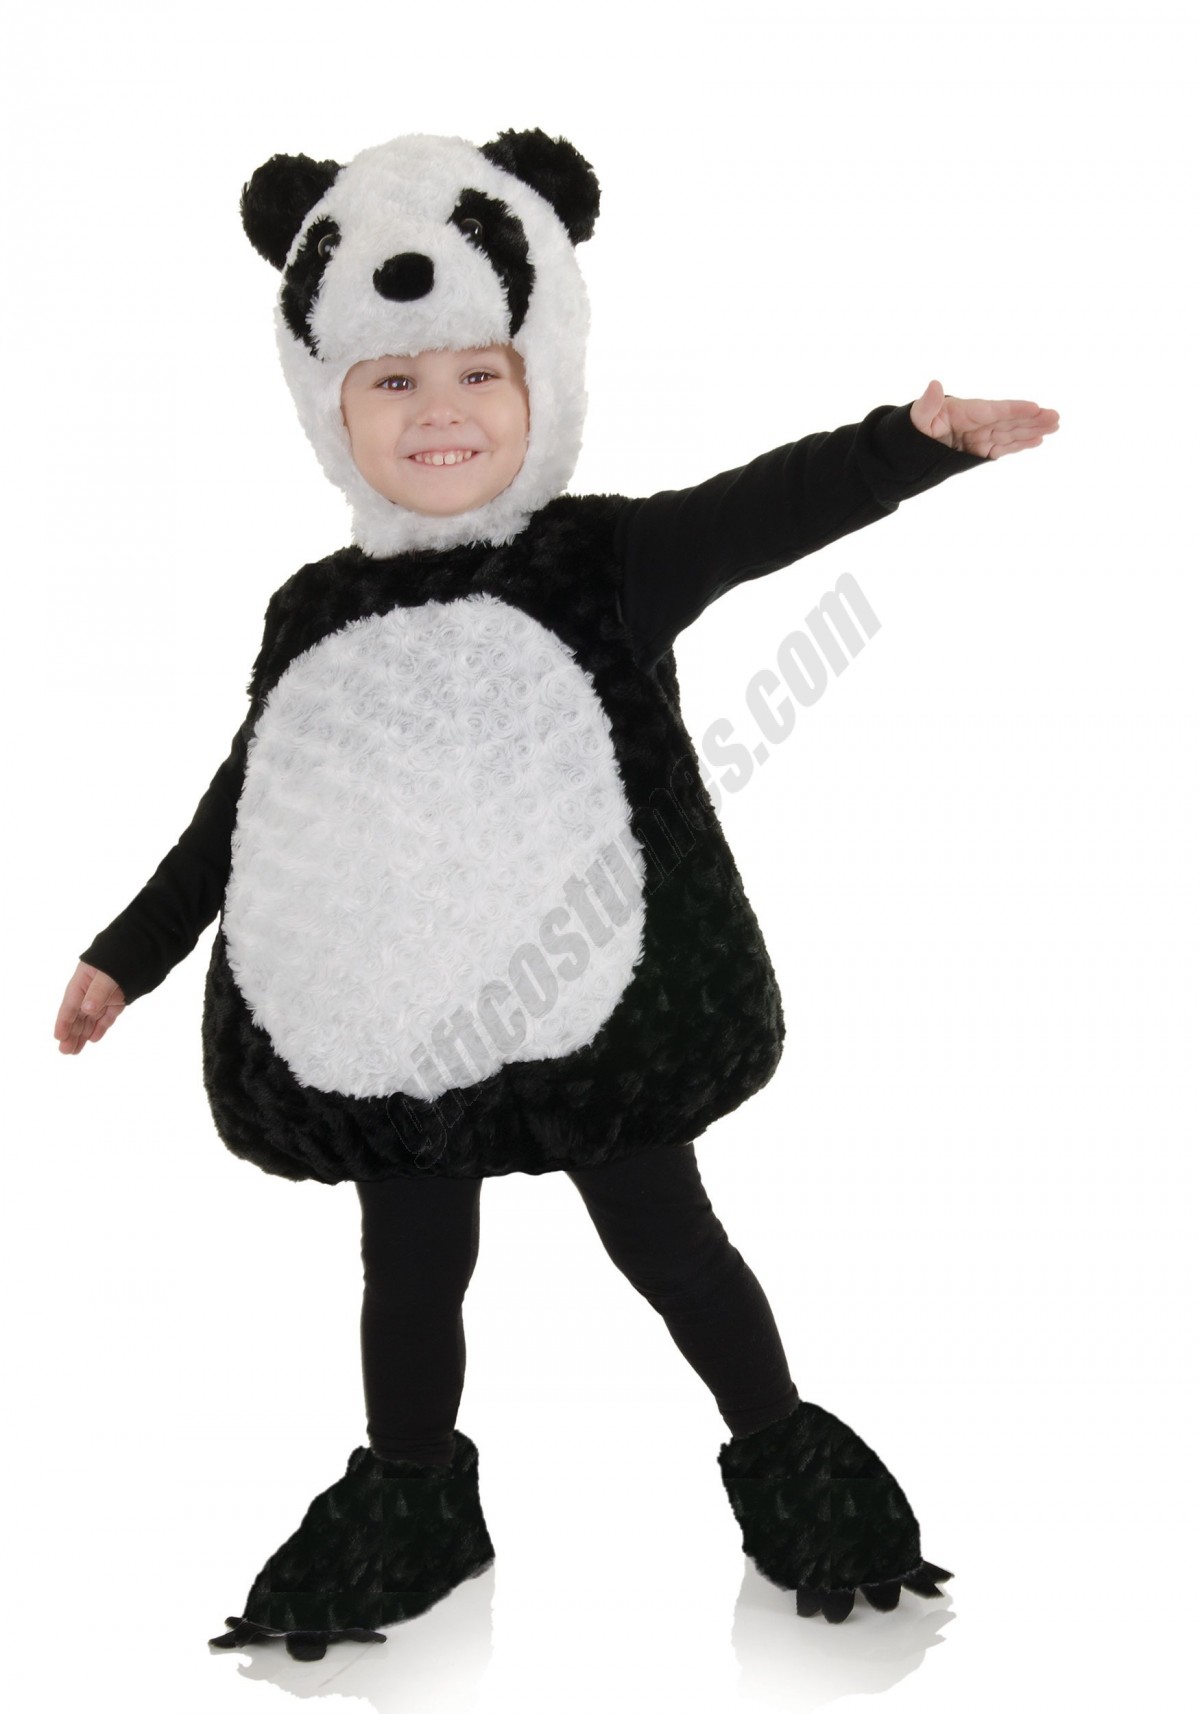 Panda Costume for Toddlers Promotions - -0